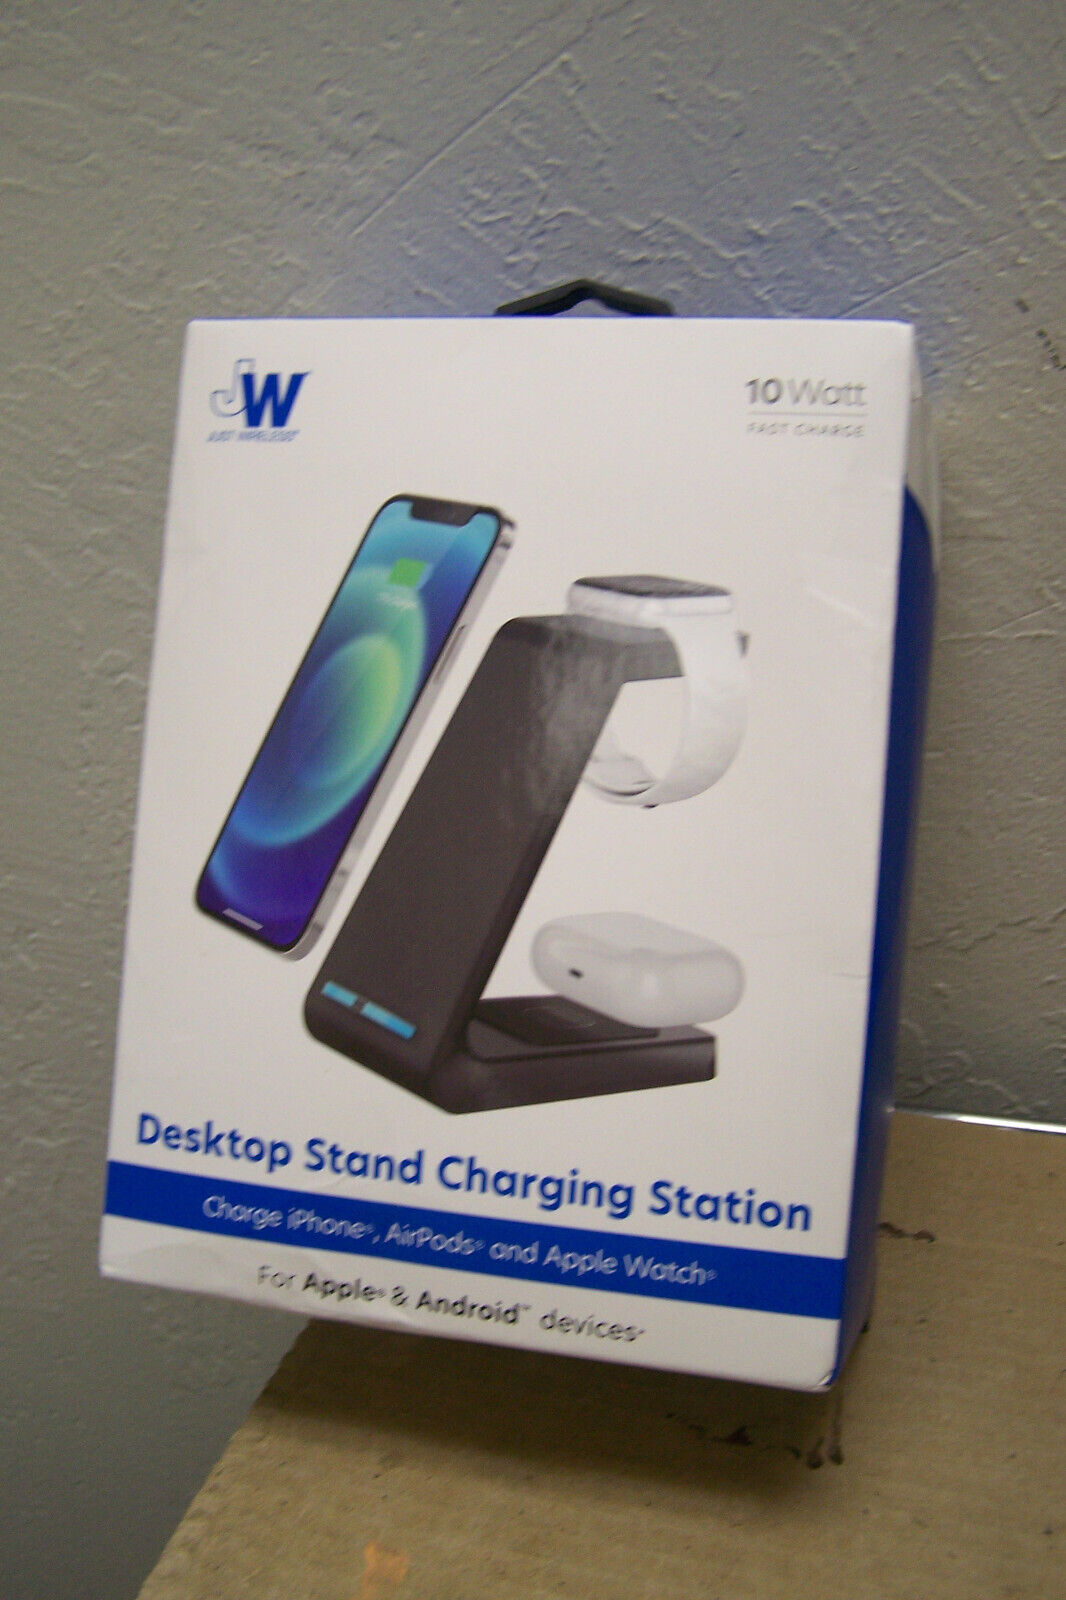 Just Wireless JW Desktop Stand Charging Station for iPhone AirPods